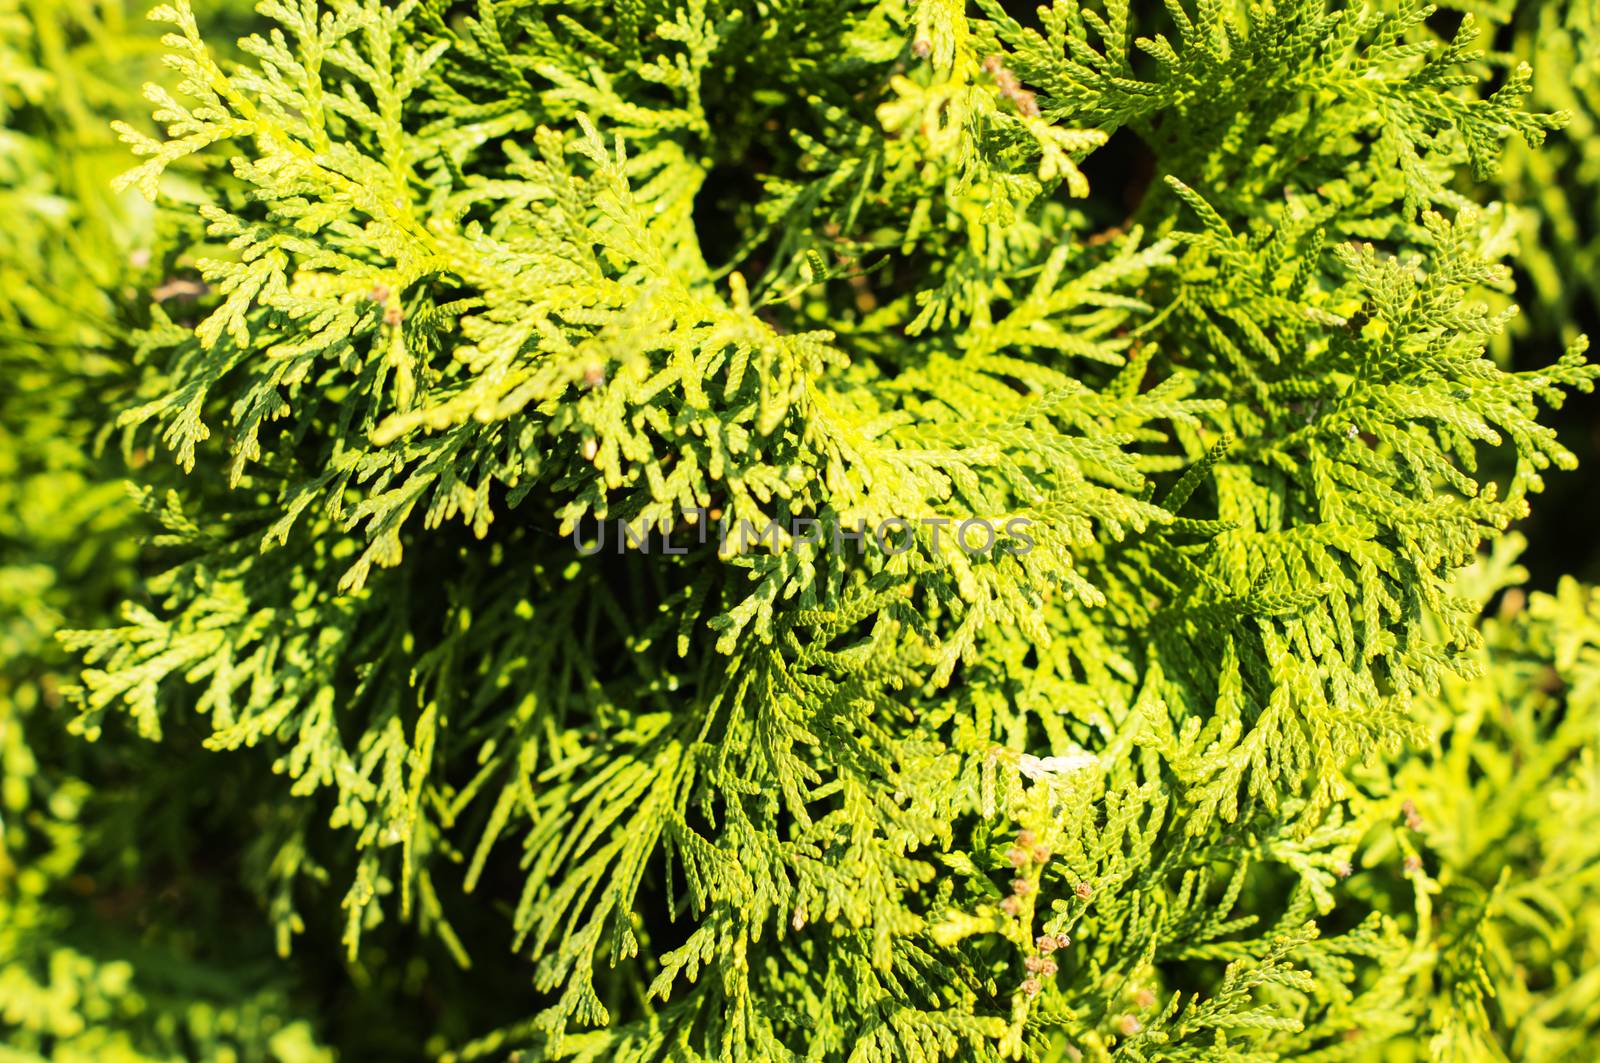 Thuja hedge close-up view. For your commercial and editorial use